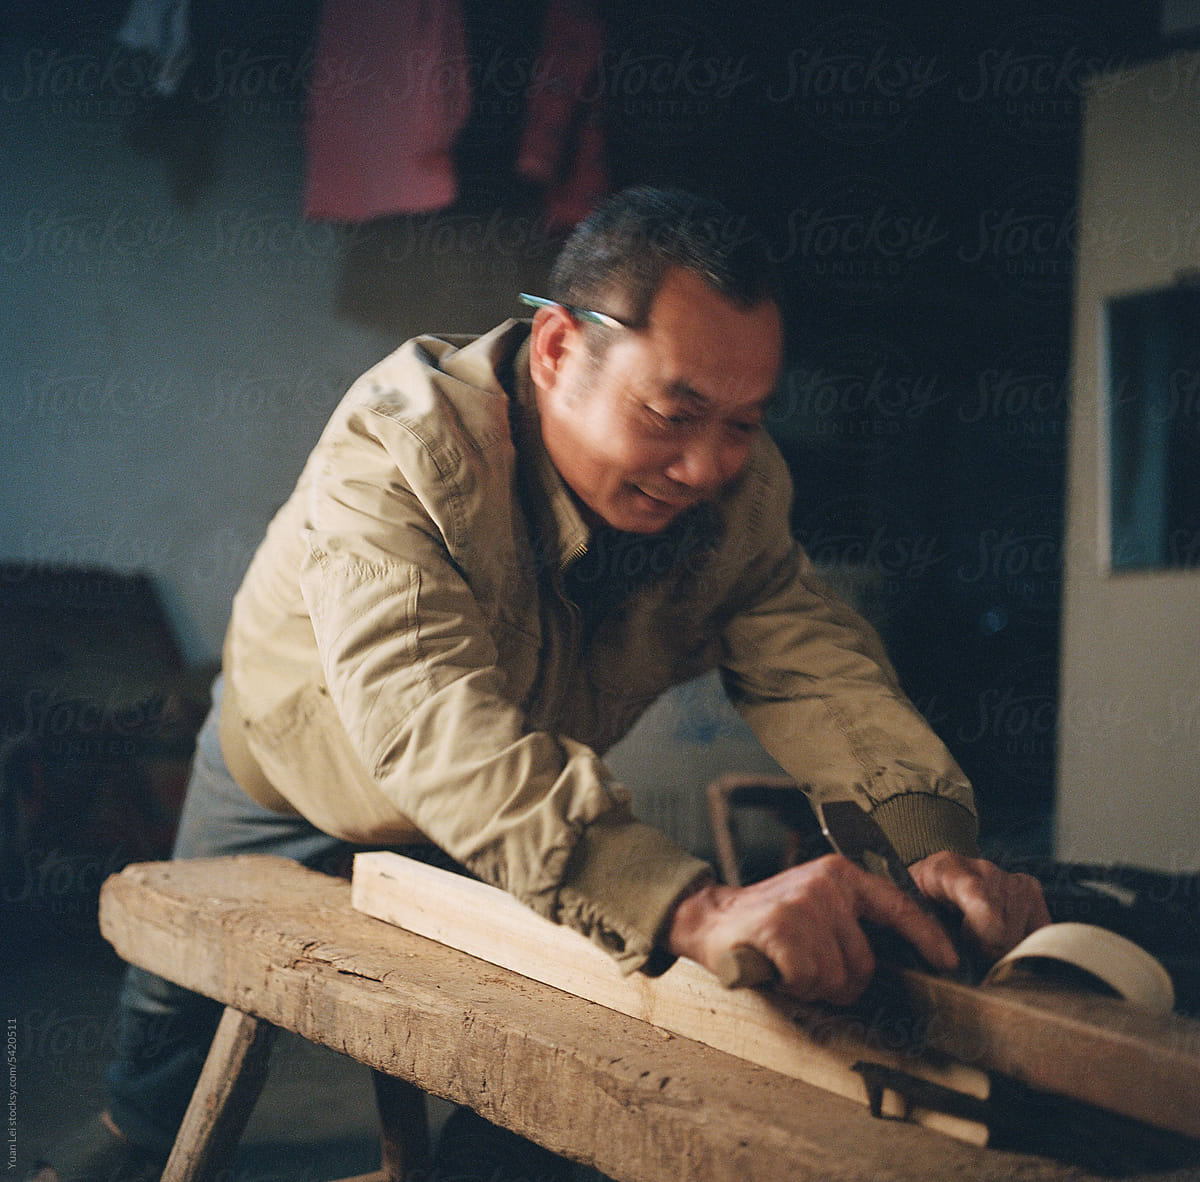 The carpenter is planing wood